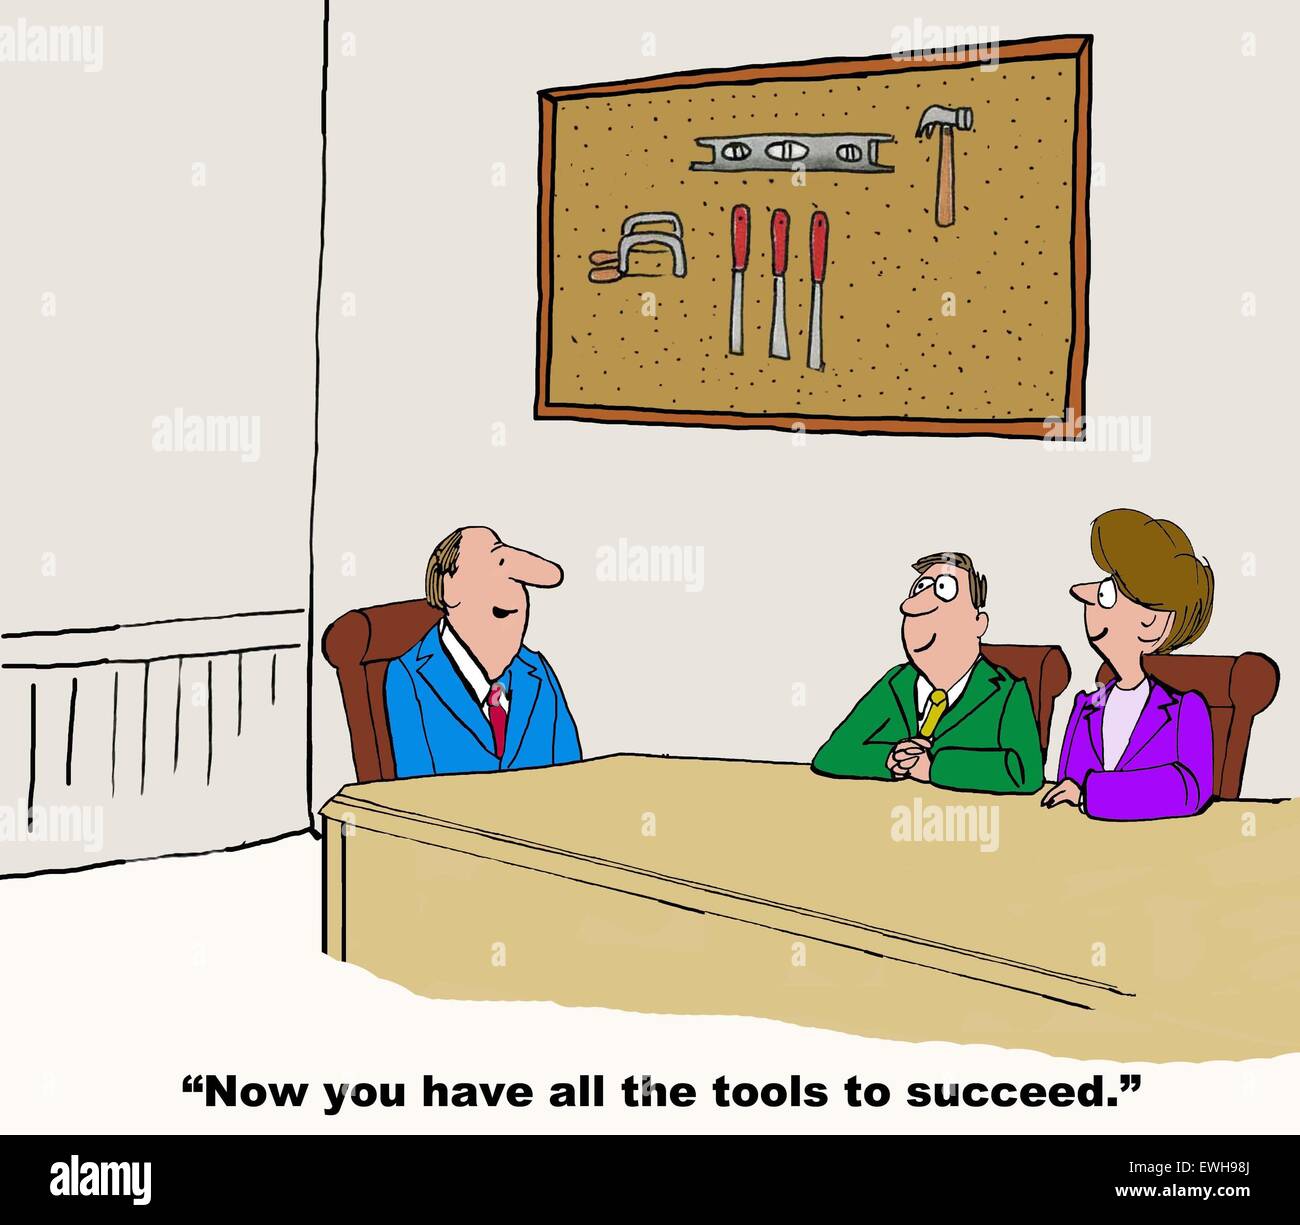 Business cartoon of meeting with tools hanging on the wall, leader says, 'now you have all the tools to succeed'. Stock Photo